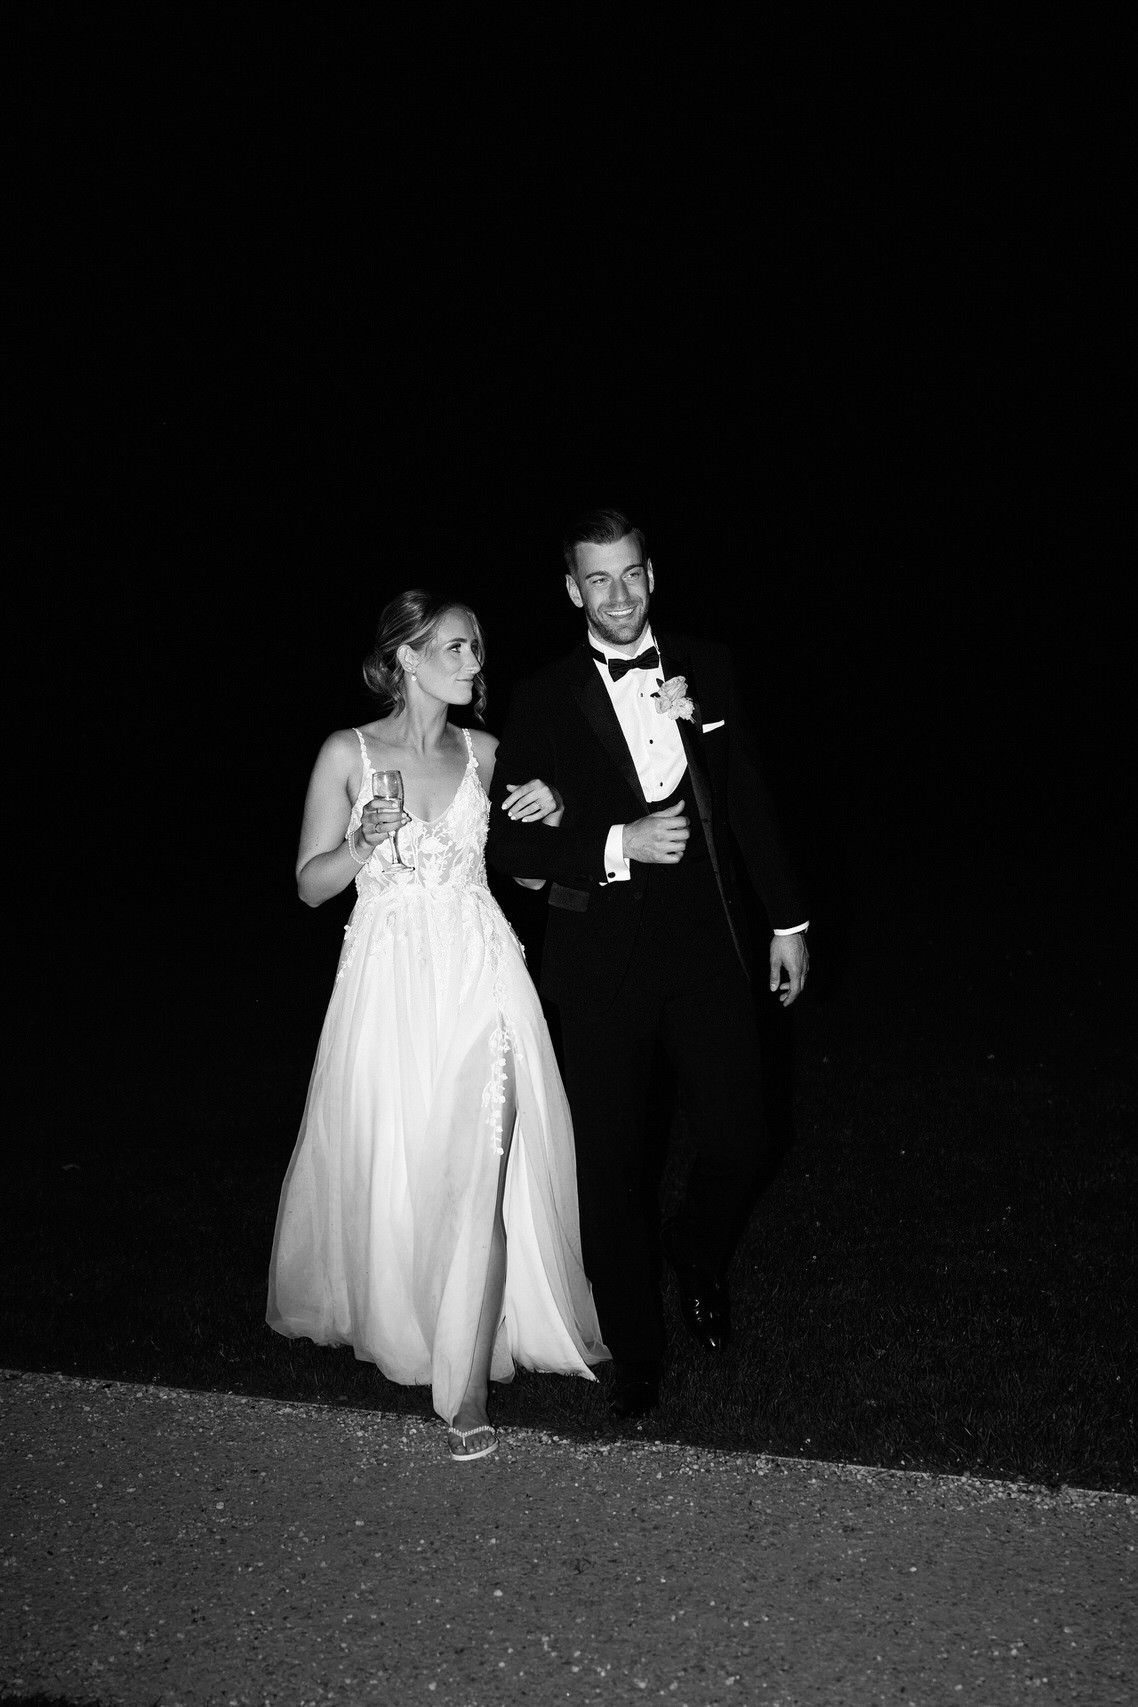 An Eastington Park wedding, with the bride and groom gracefully walking down a path at night.